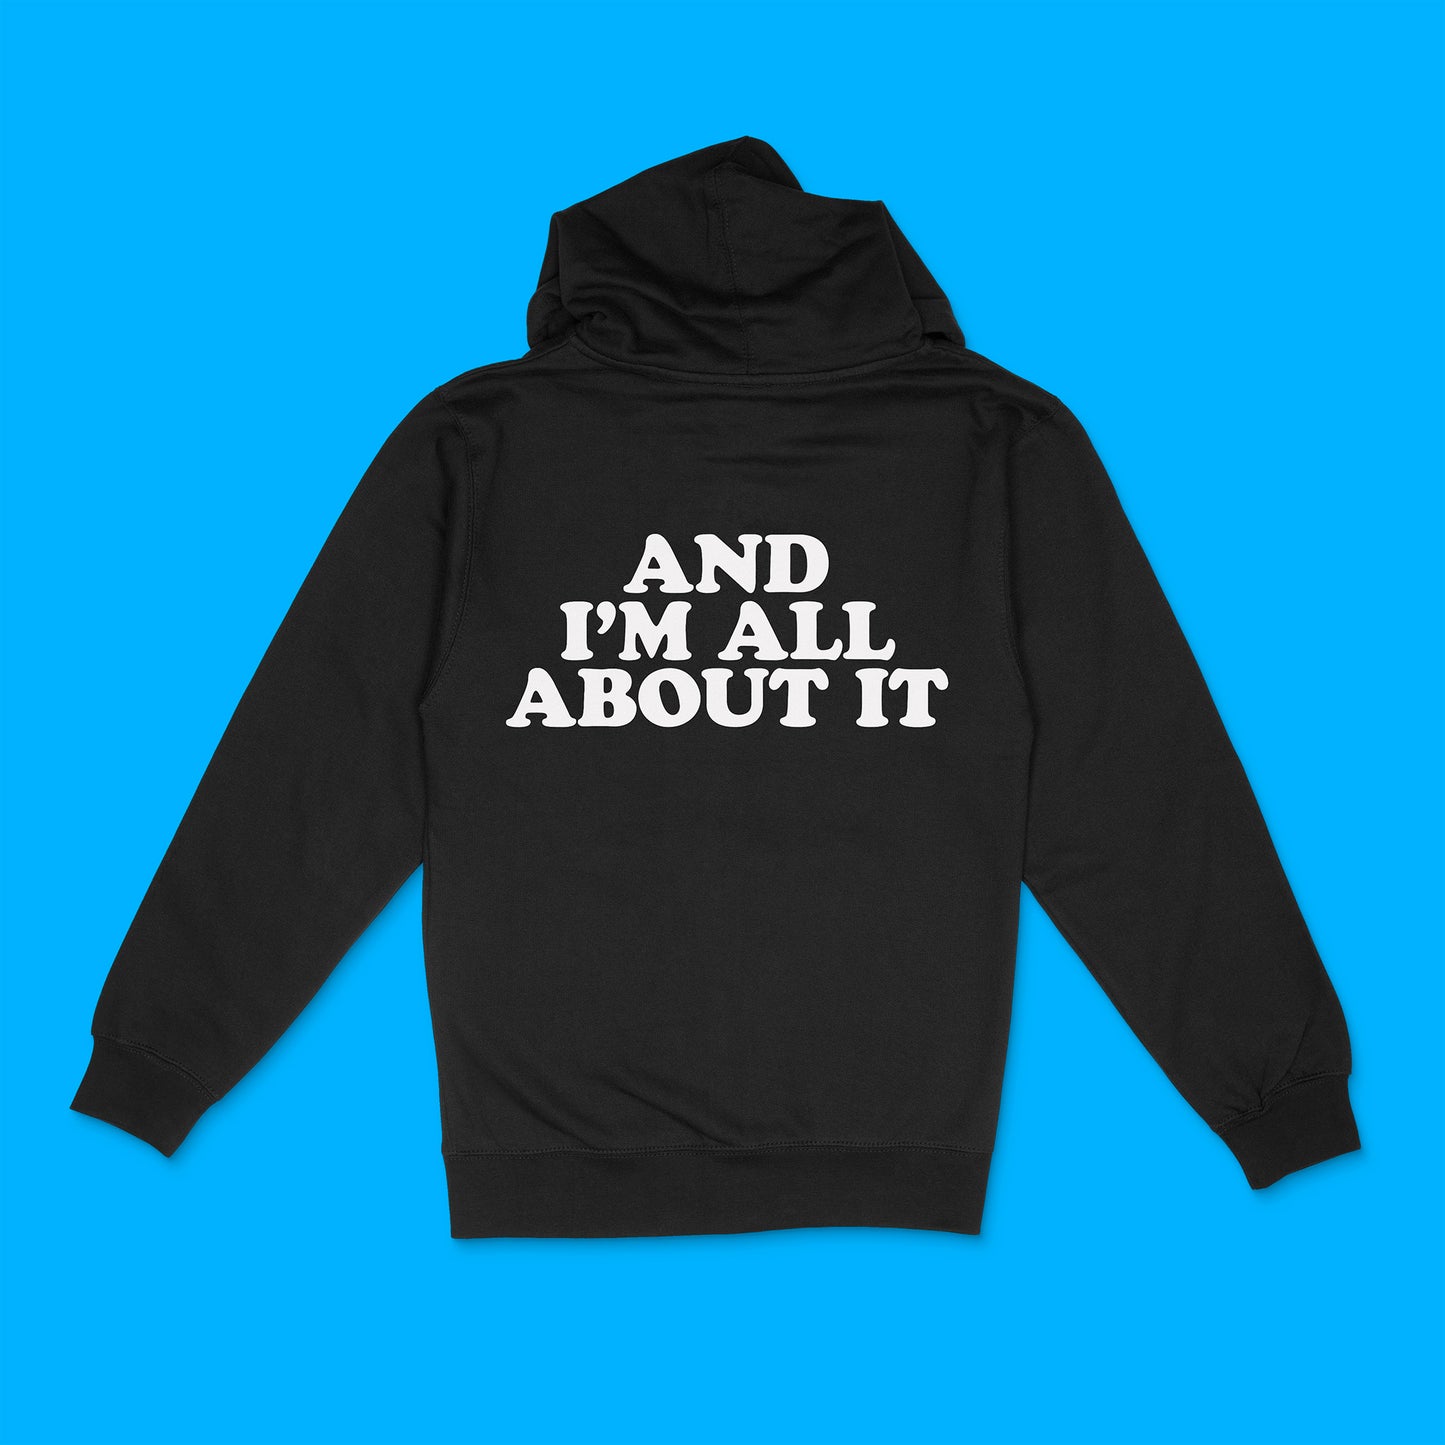 black unisex zip hoodie with custom sample text "and I'm all about it" in white matter, pop serif text style on full back of garment